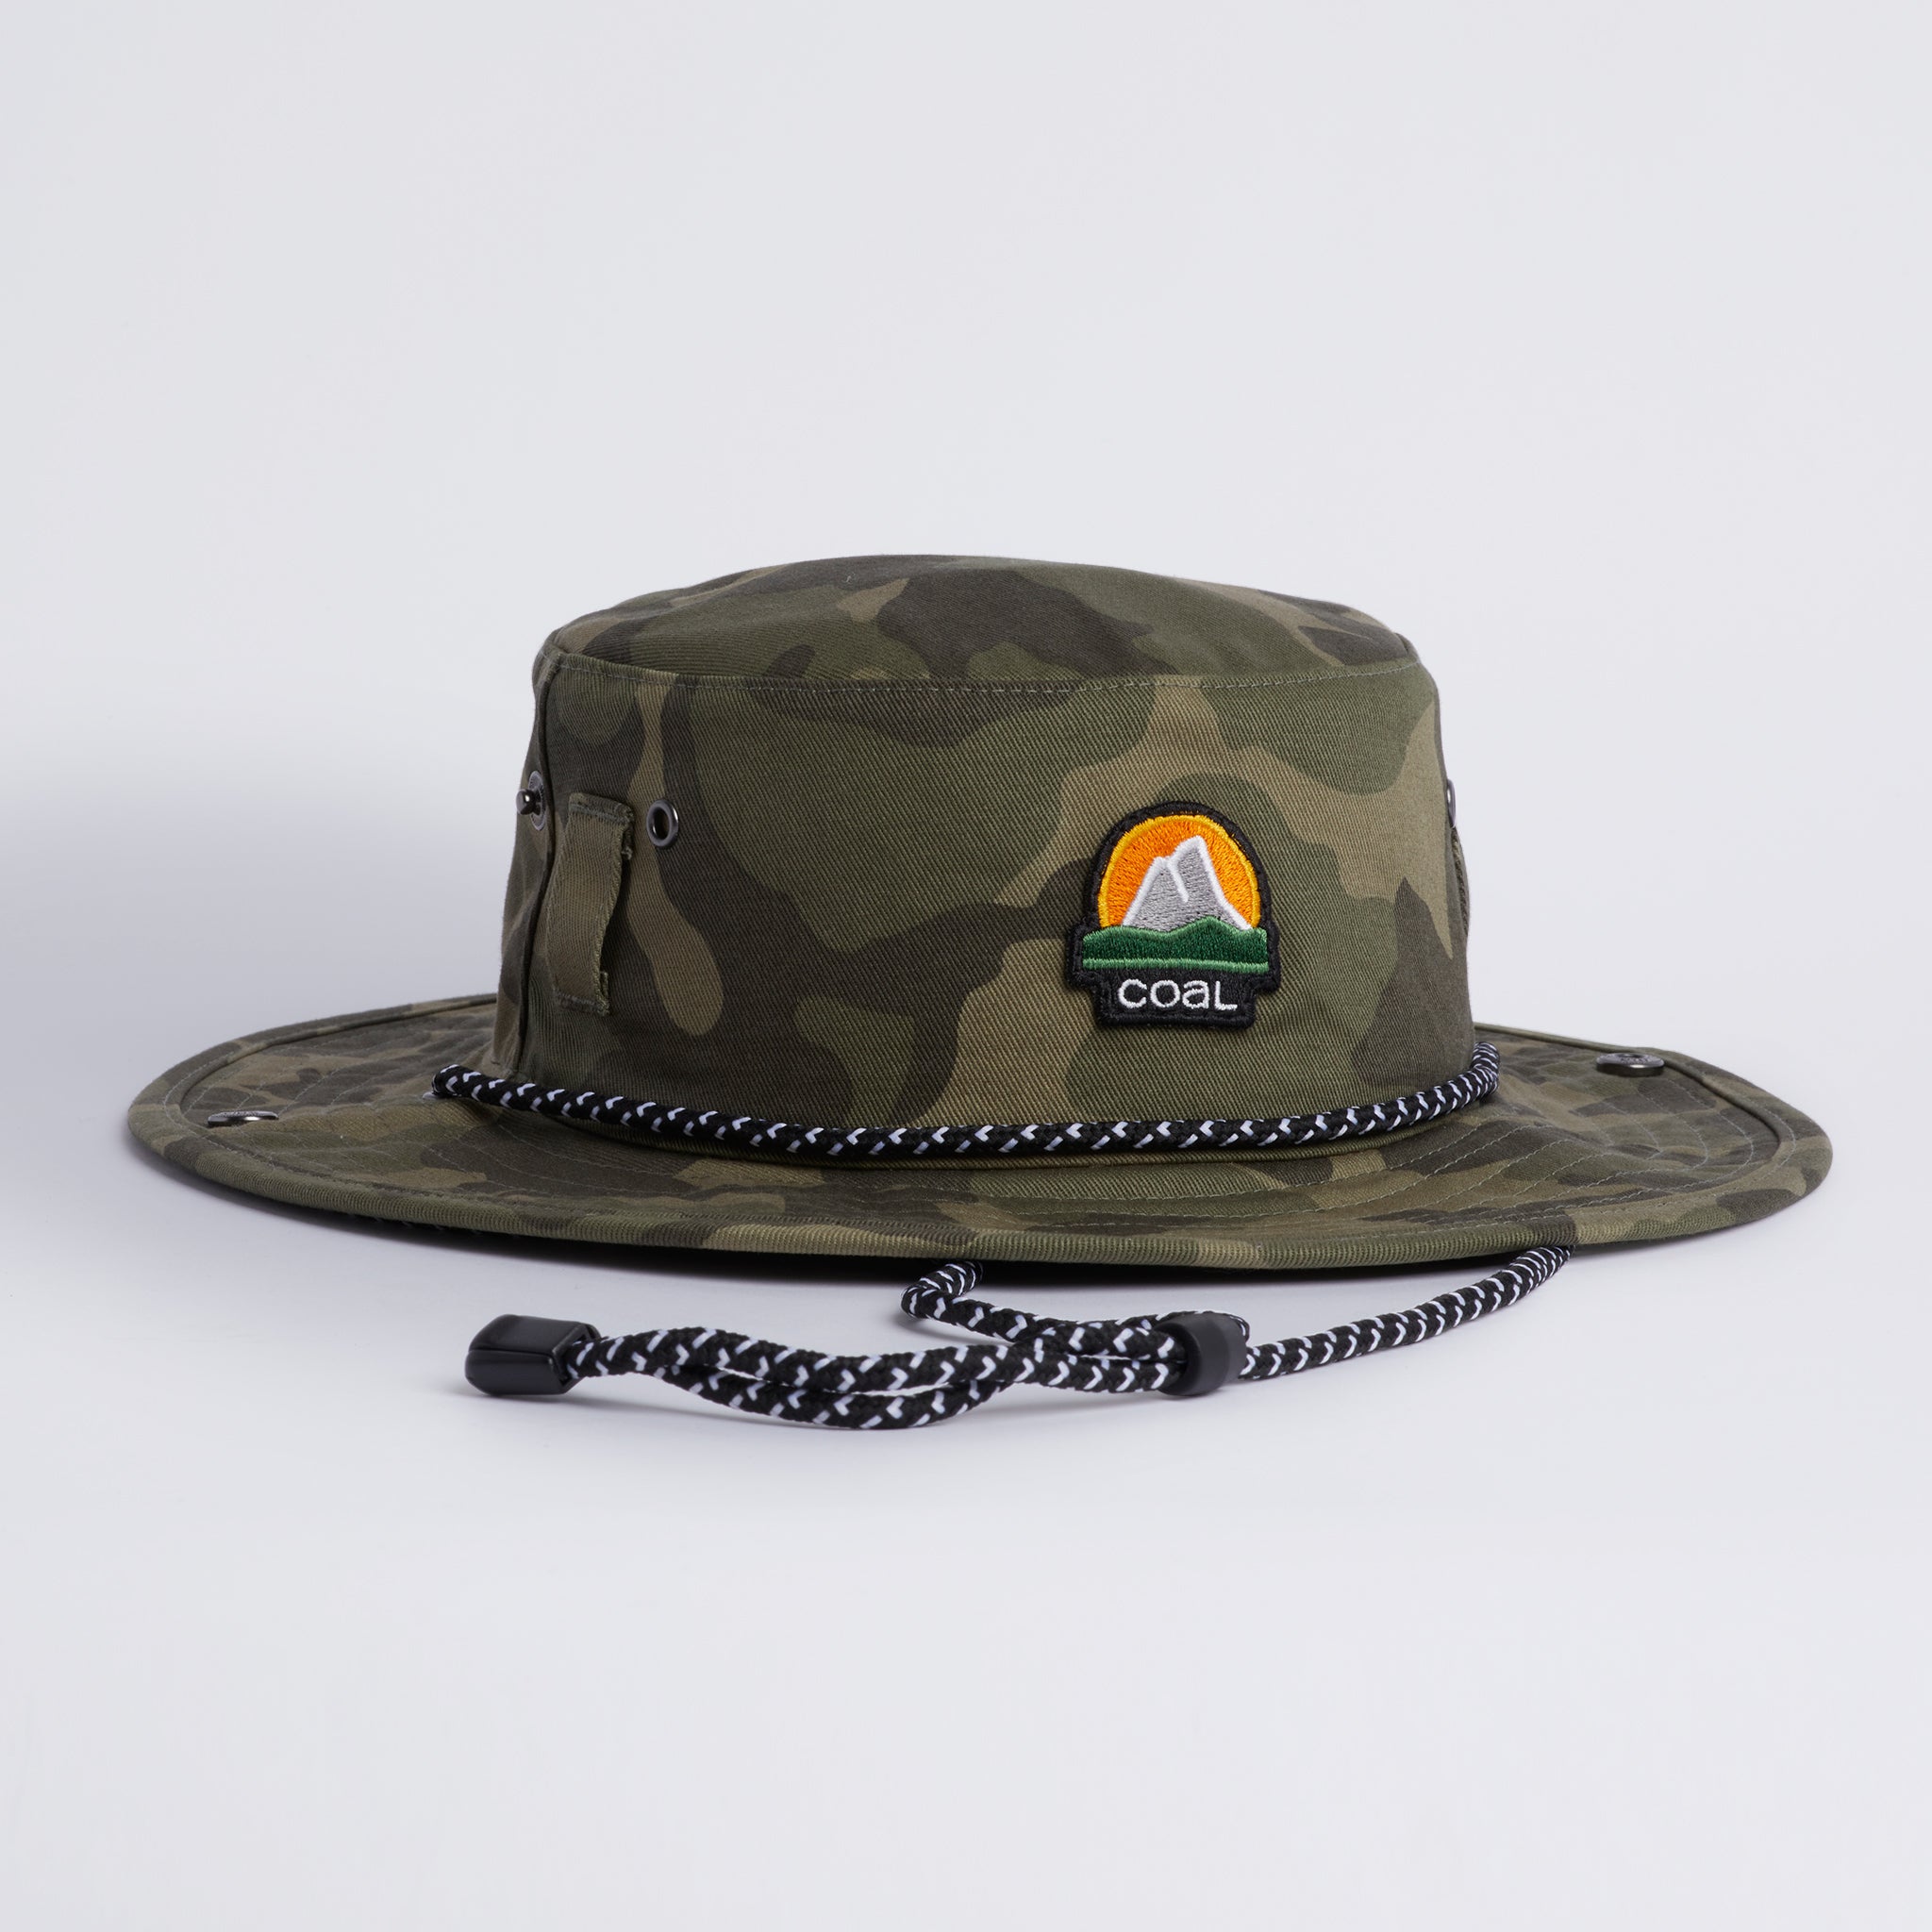 The 'Seymour Kids' – Waxed Canvas Boonie Hat